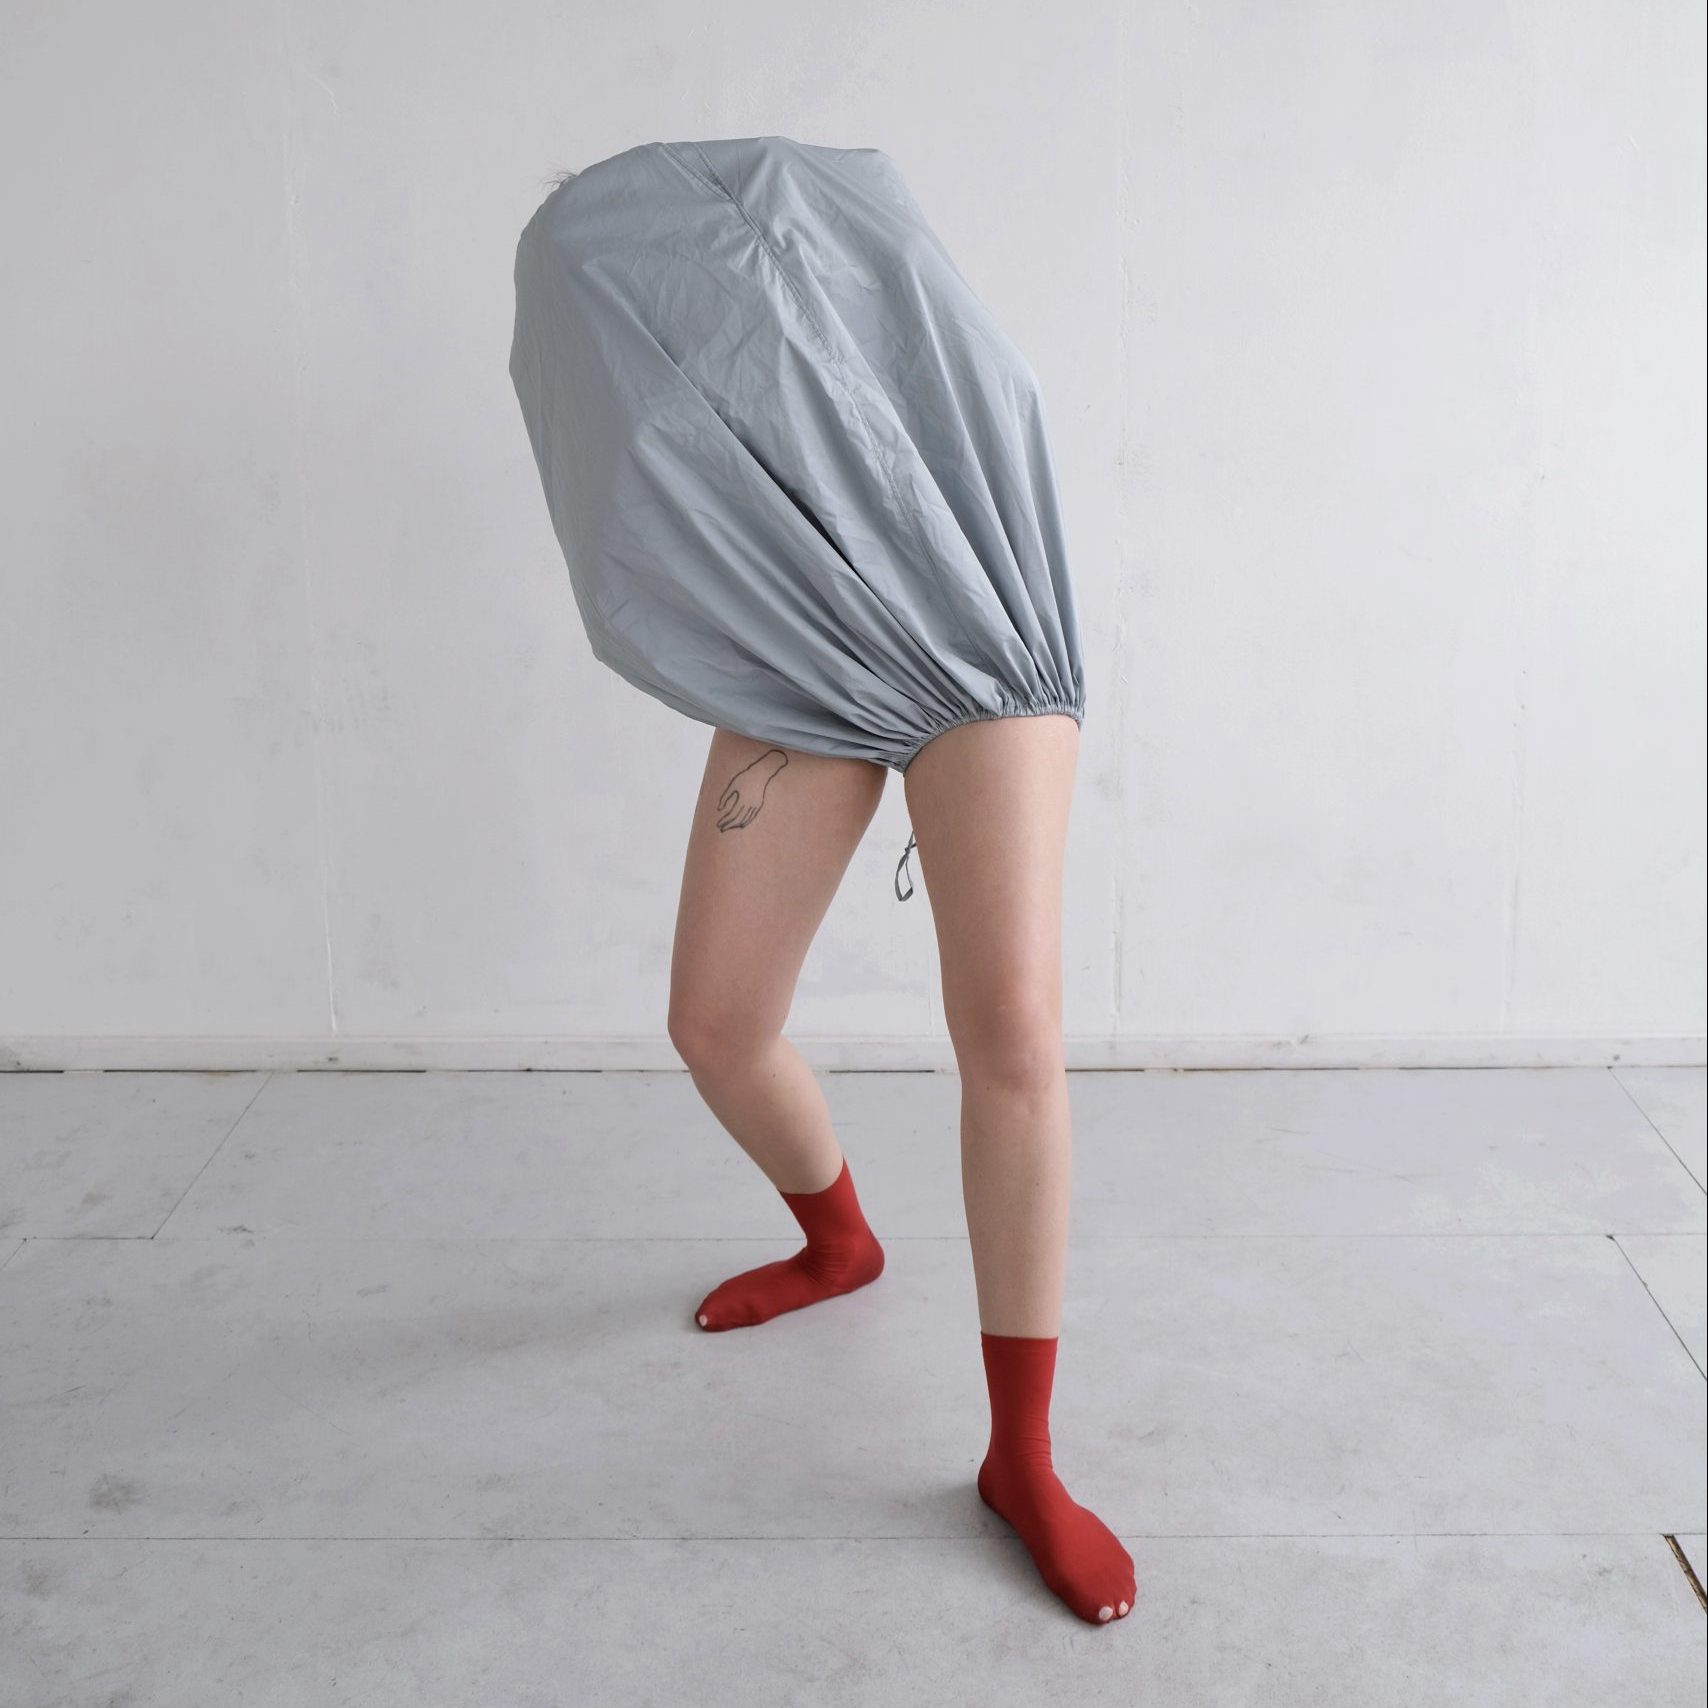 A dance artist poses in a grey studio. They have grey fabric covering their entire head and torso and are wearing bright red socks.